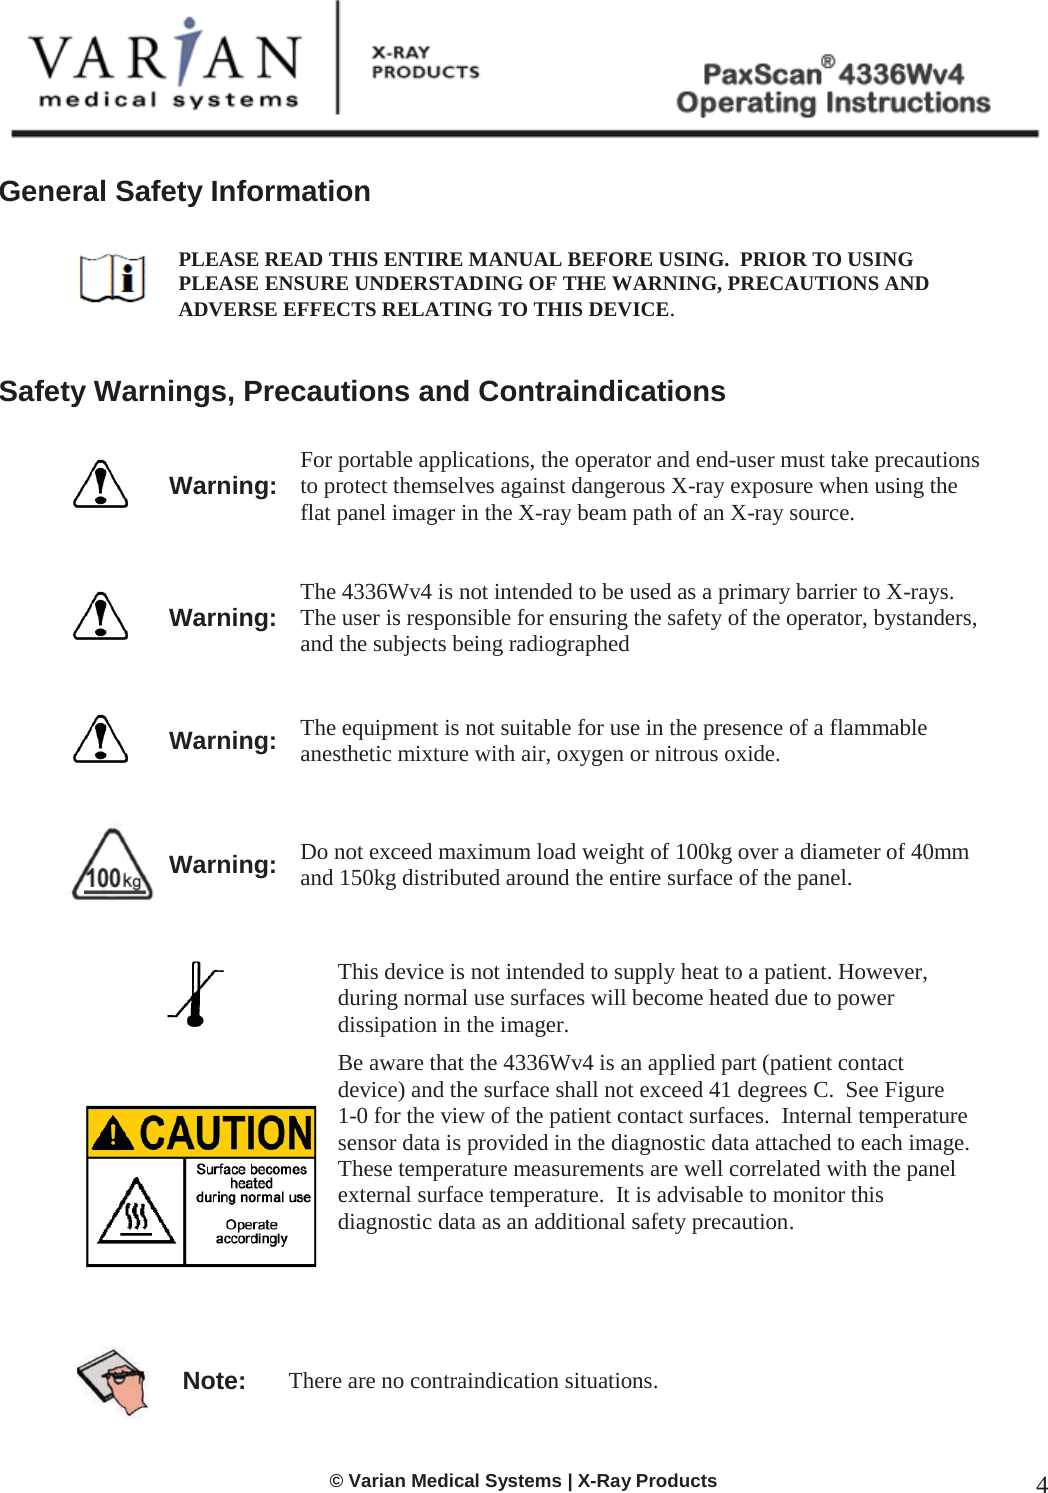  © Varian Medical Systems | X-Ray Products 4  General Safety Information   PLEASE READ THIS ENTIRE MANUAL BEFORE USING.  PRIOR TO USING PLEASE ENSURE UNDERSTADING OF THE WARNING, PRECAUTIONS AND ADVERSE EFFECTS RELATING TO THIS DEVICE.   Safety Warnings, Precautions and Contraindications   Warning: For portable applications, the operator and end-user must take precautions to protect themselves against dangerous X-ray exposure when using the flat panel imager in the X-ray beam path of an X-ray source.      Warning: The 4336Wv4 is not intended to be used as a primary barrier to X-rays.  The user is responsible for ensuring the safety of the operator, bystanders, and the subjects being radiographed    Warning: The equipment is not suitable for use in the presence of a flammable anesthetic mixture with air, oxygen or nitrous oxide.      Warning: Do not exceed maximum load weight of 100kg over a diameter of 40mm and 150kg distributed around the entire surface of the panel.      This device is not intended to supply heat to a patient. However, during normal use surfaces will become heated due to power dissipation in the imager.    Be aware that the 4336Wv4 is an applied part (patient contact device) and the surface shall not exceed 41 degrees C.  See Figure   1-0 for the view of the patient contact surfaces.  Internal temperature sensor data is provided in the diagnostic data attached to each image.  These temperature measurements are well correlated with the panel external surface temperature.  It is advisable to monitor this diagnostic data as an additional safety precaution.    Note: There are no contraindication situations.     